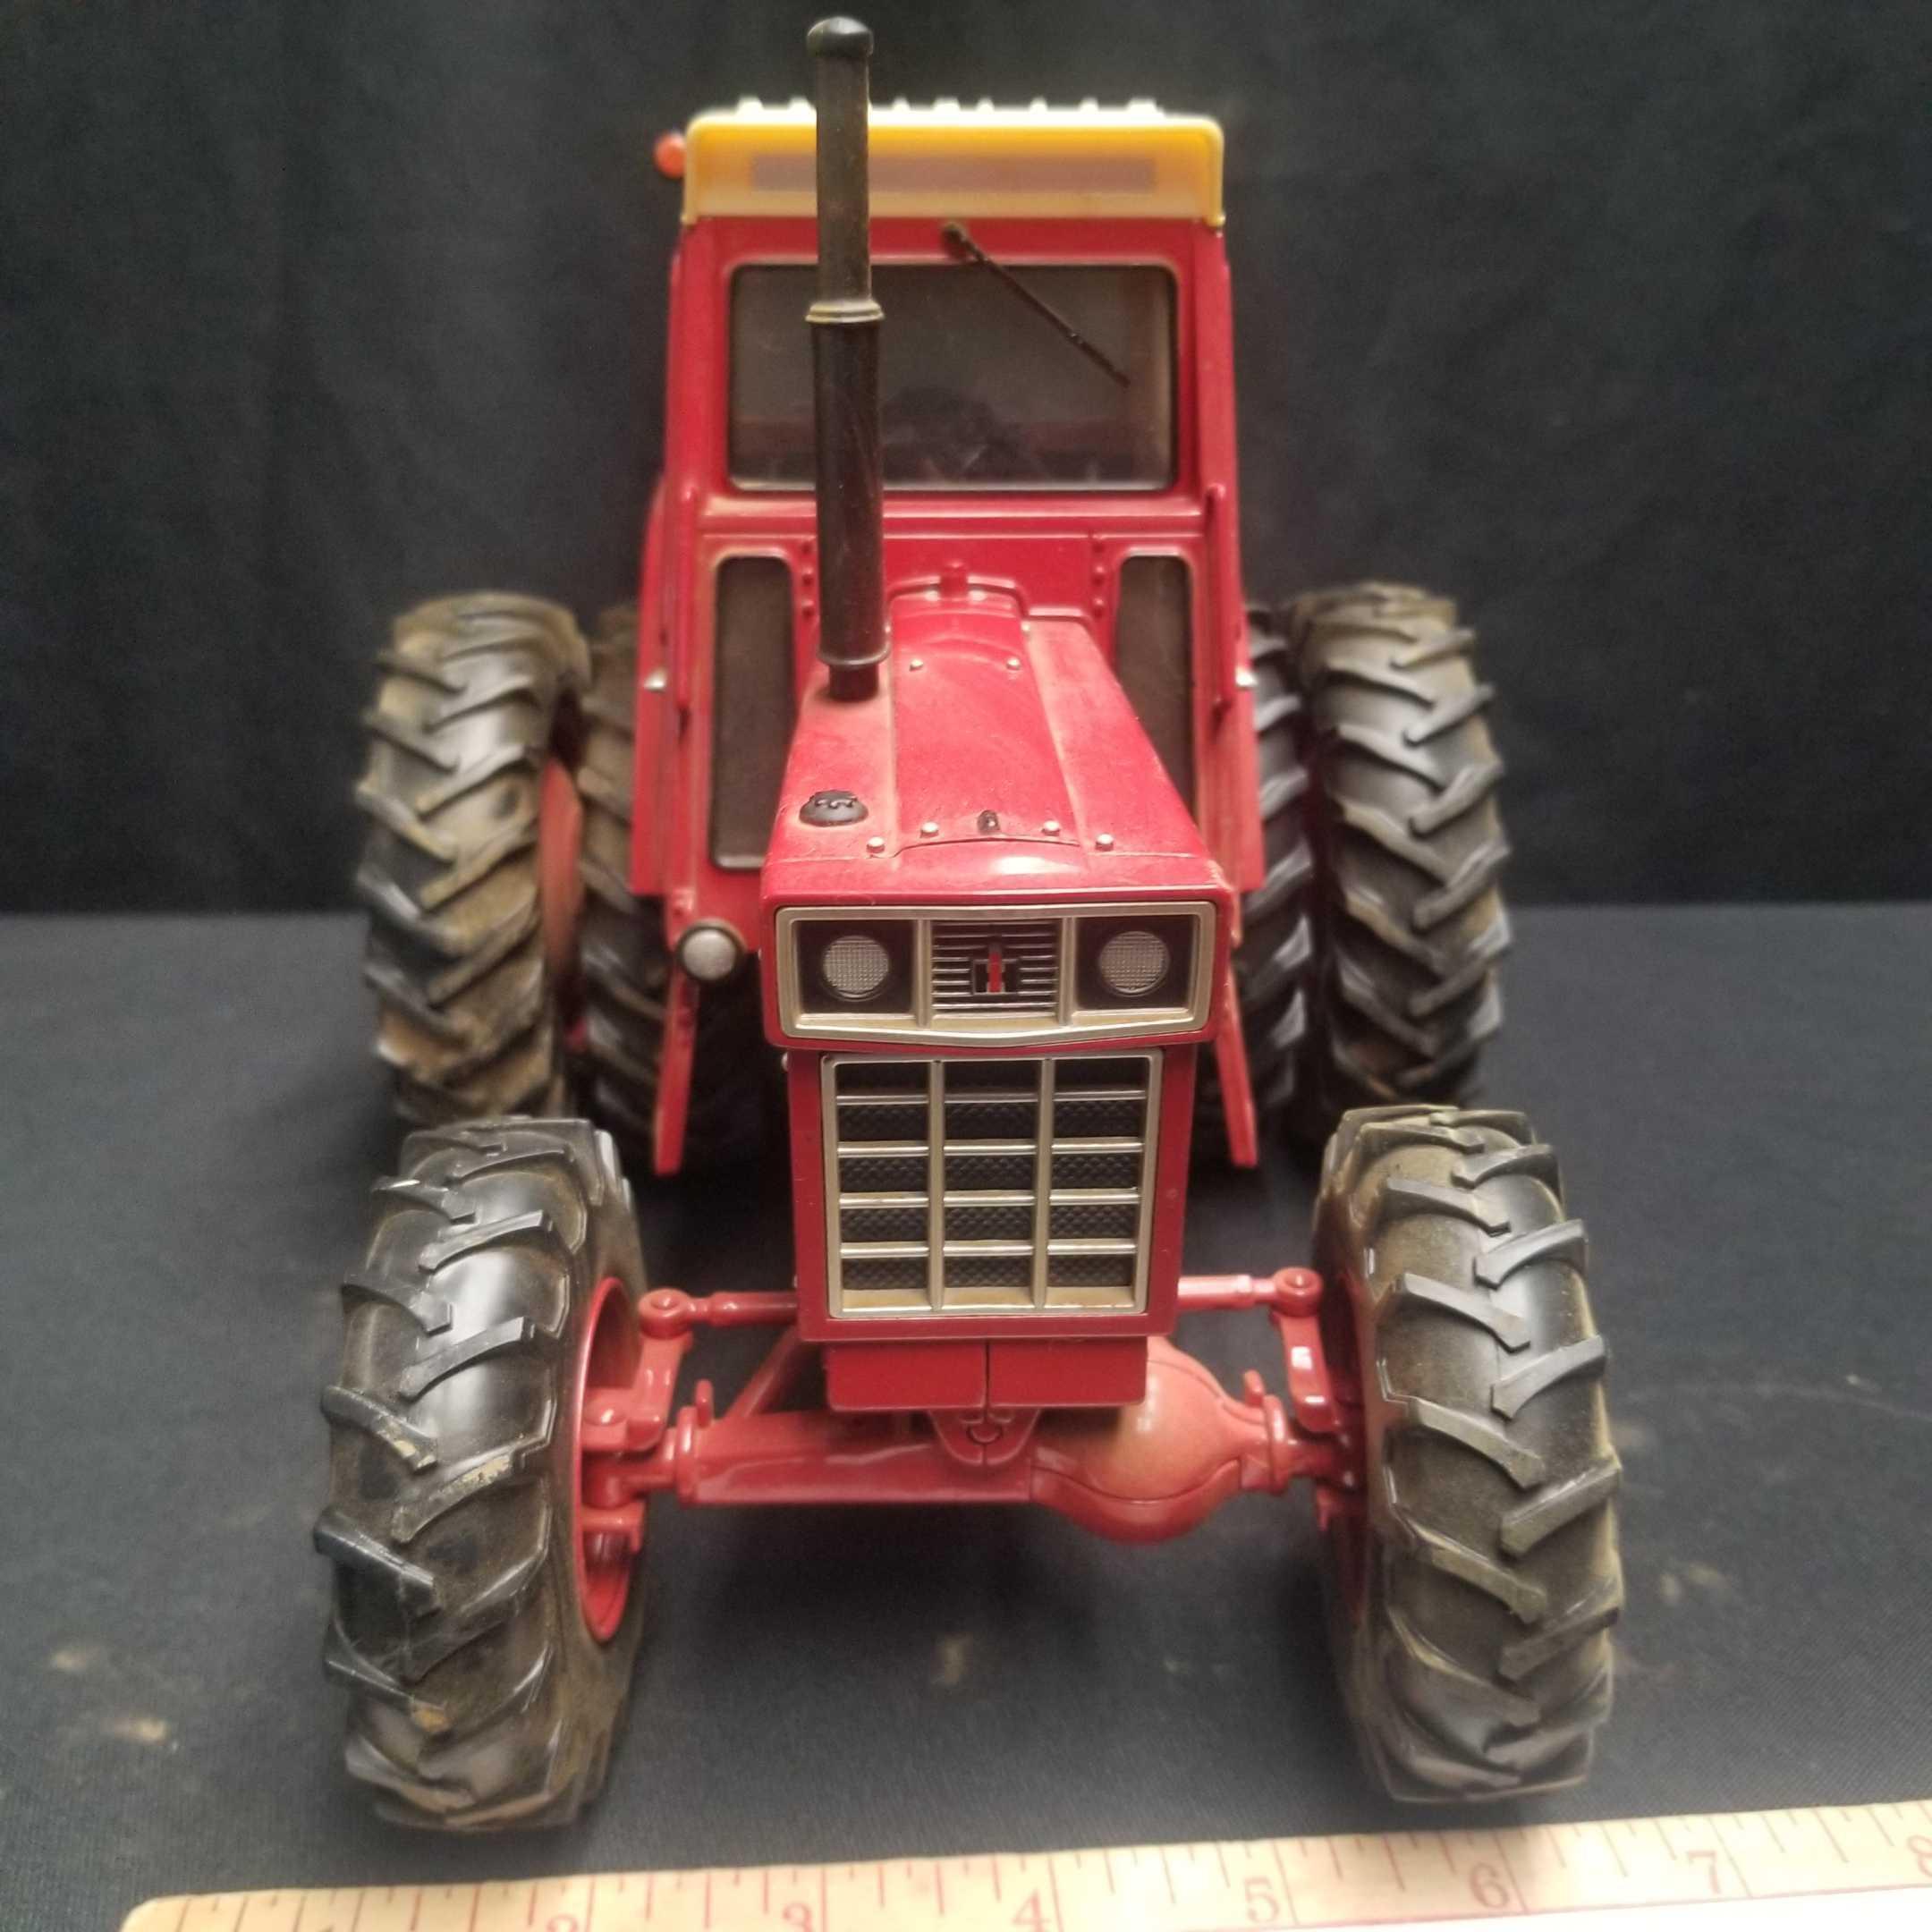 INTERNATIONAL "1466 TURBO" TRACTOR, RED CAB, MFD, DUALS